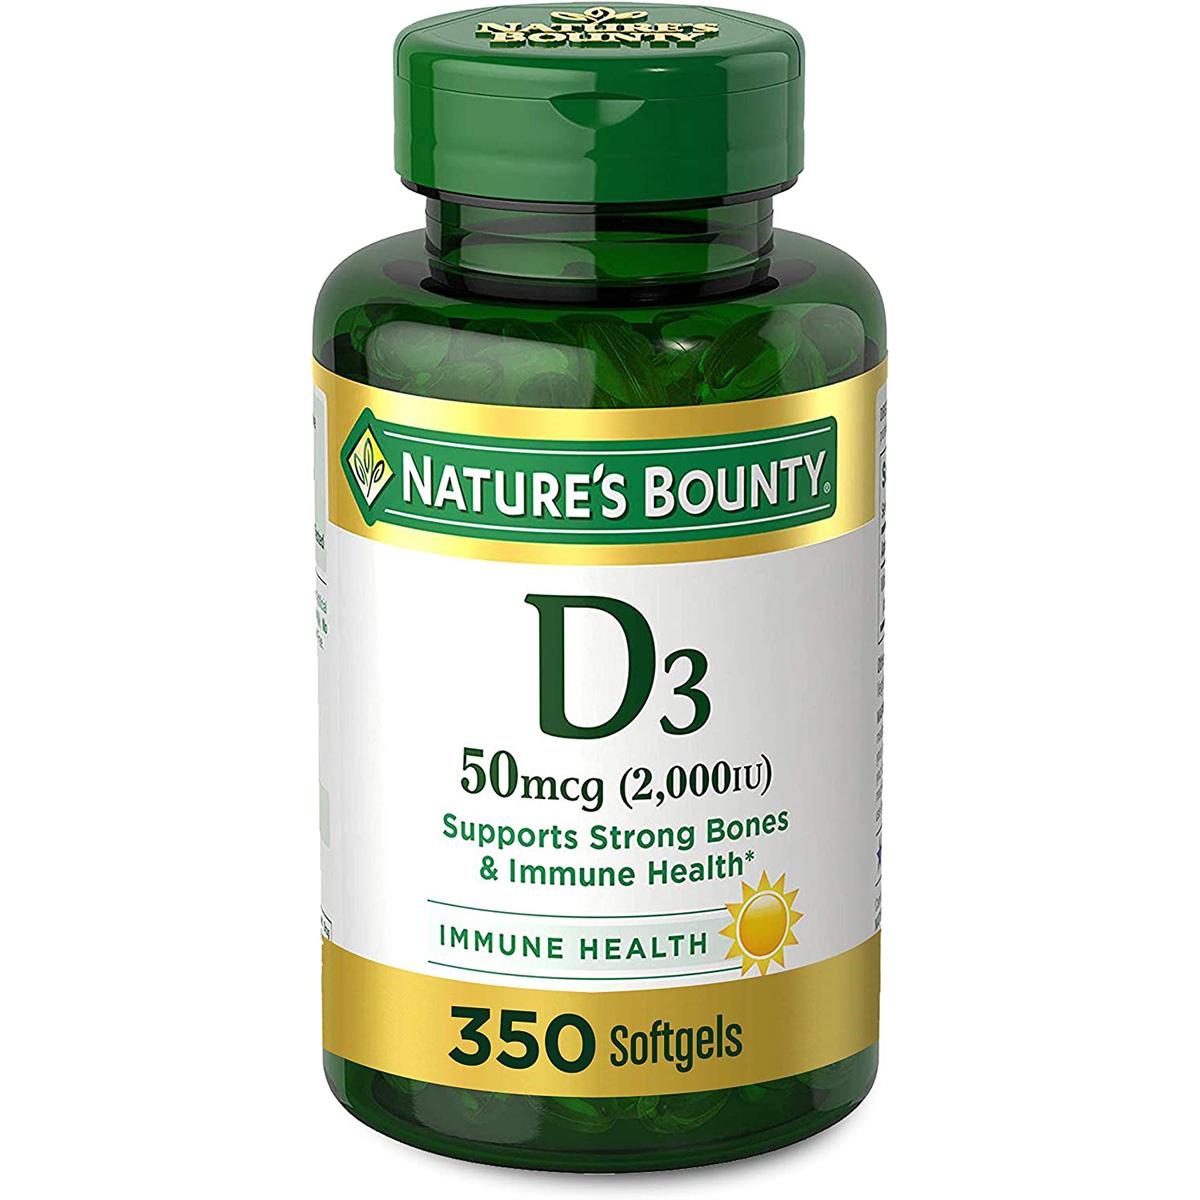 Vitamin D by Natures Bounty for Immune Support for $9.87 Shipped